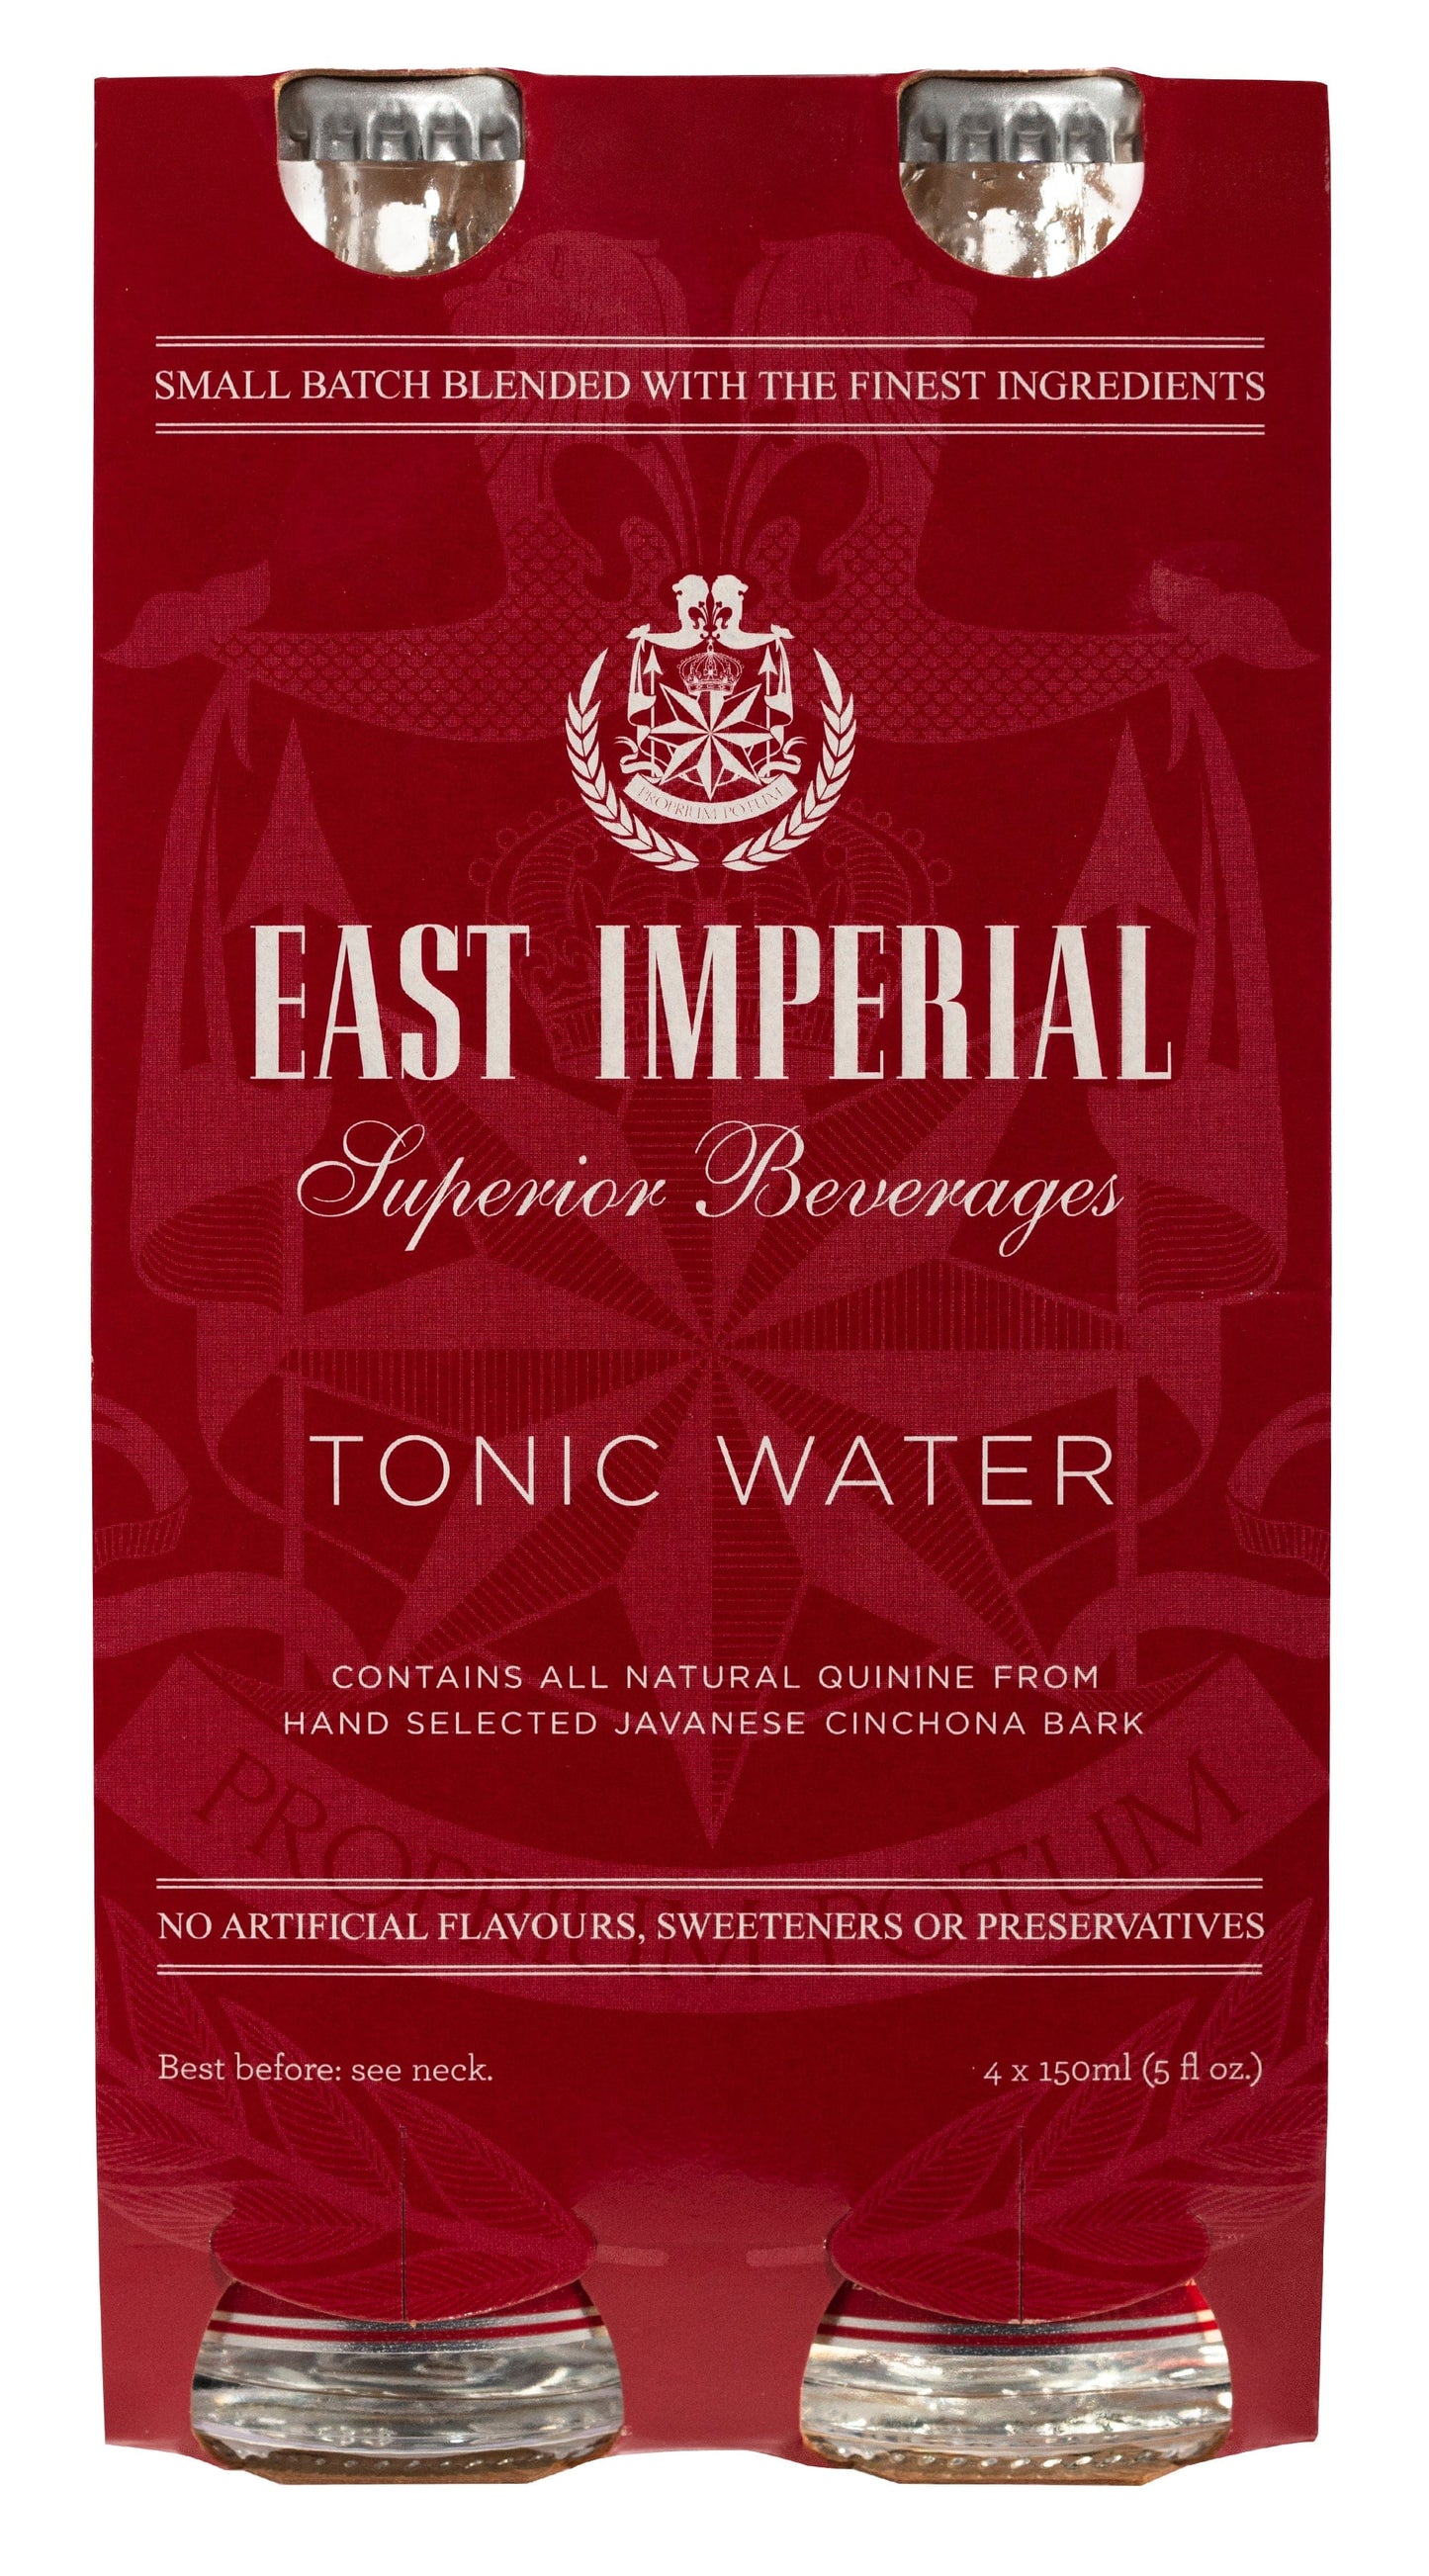 East Imperial Burma Tonic Water (Retail Package) - 6 x 4 x 150ml